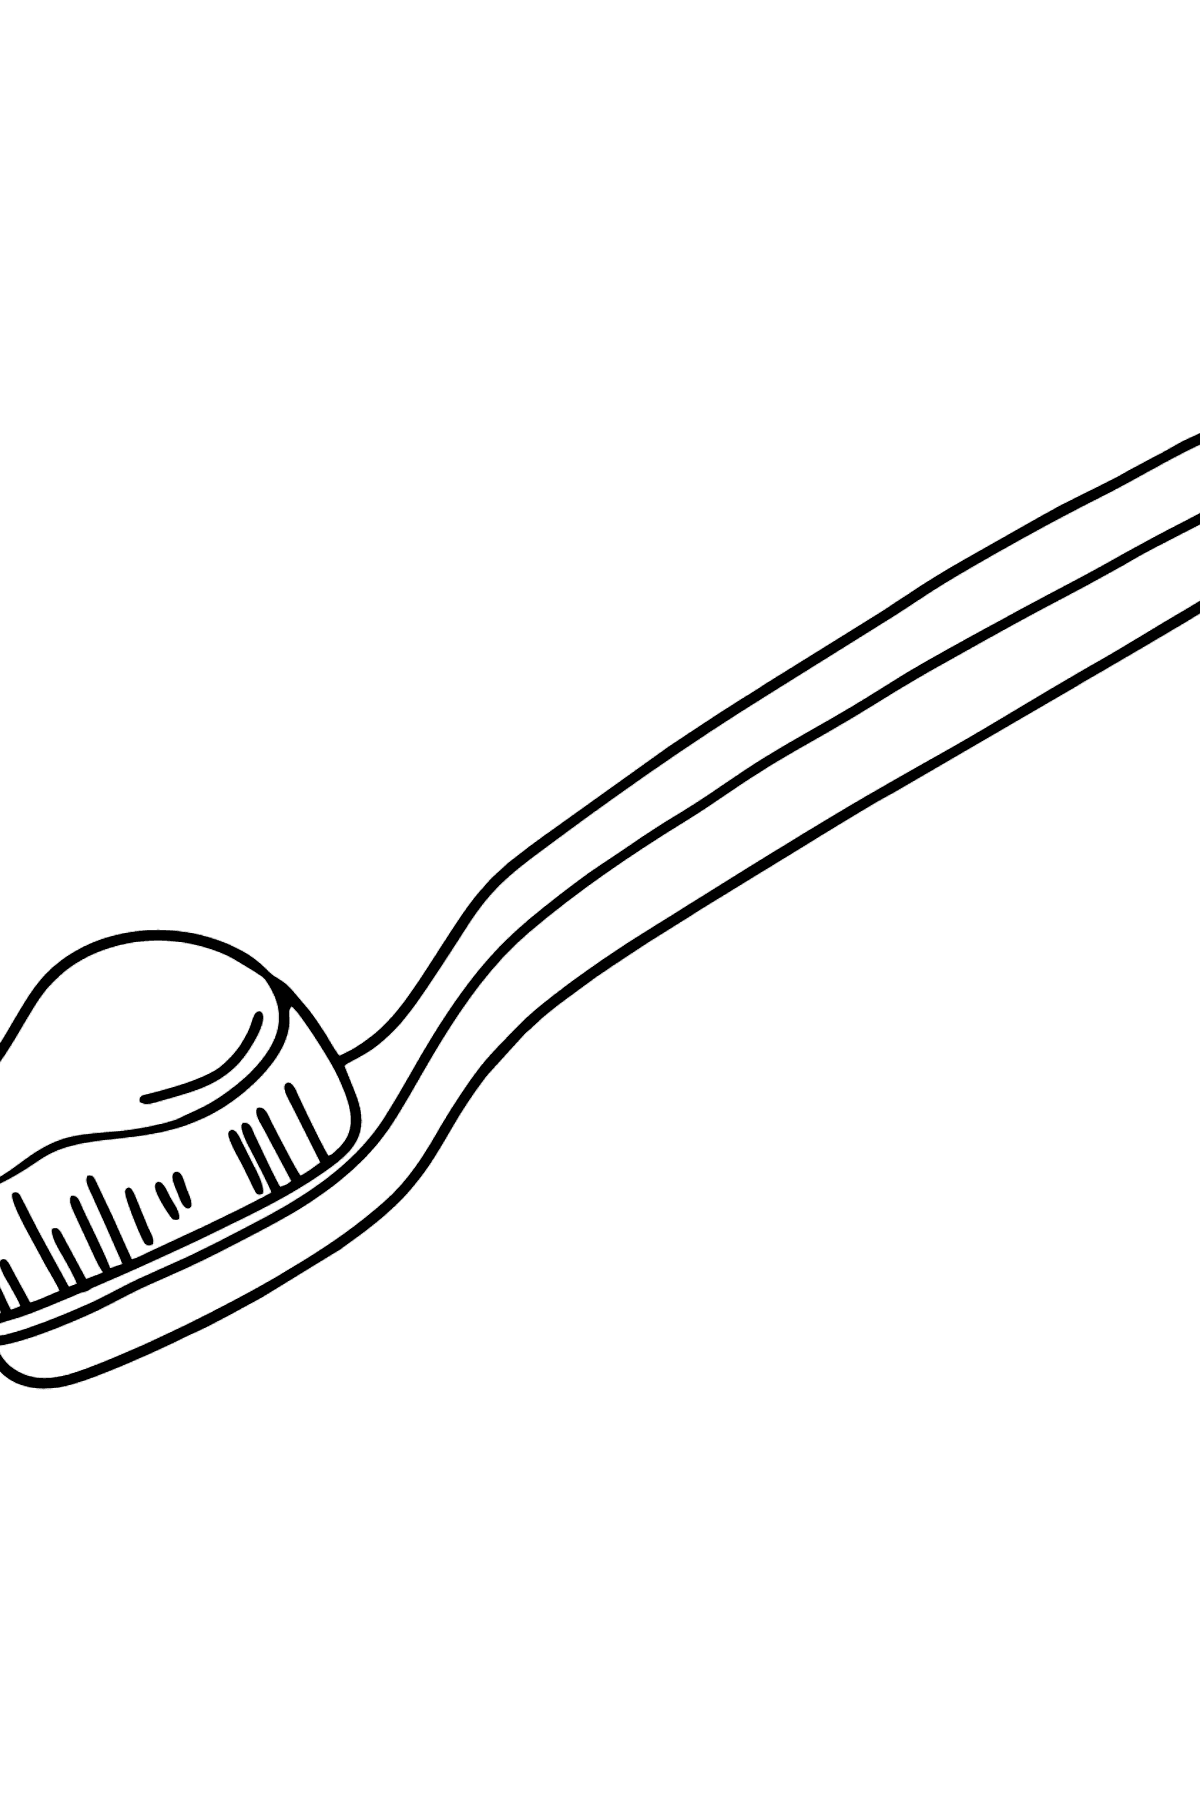 Toothbrush coloring page - Coloring Pages for Kids